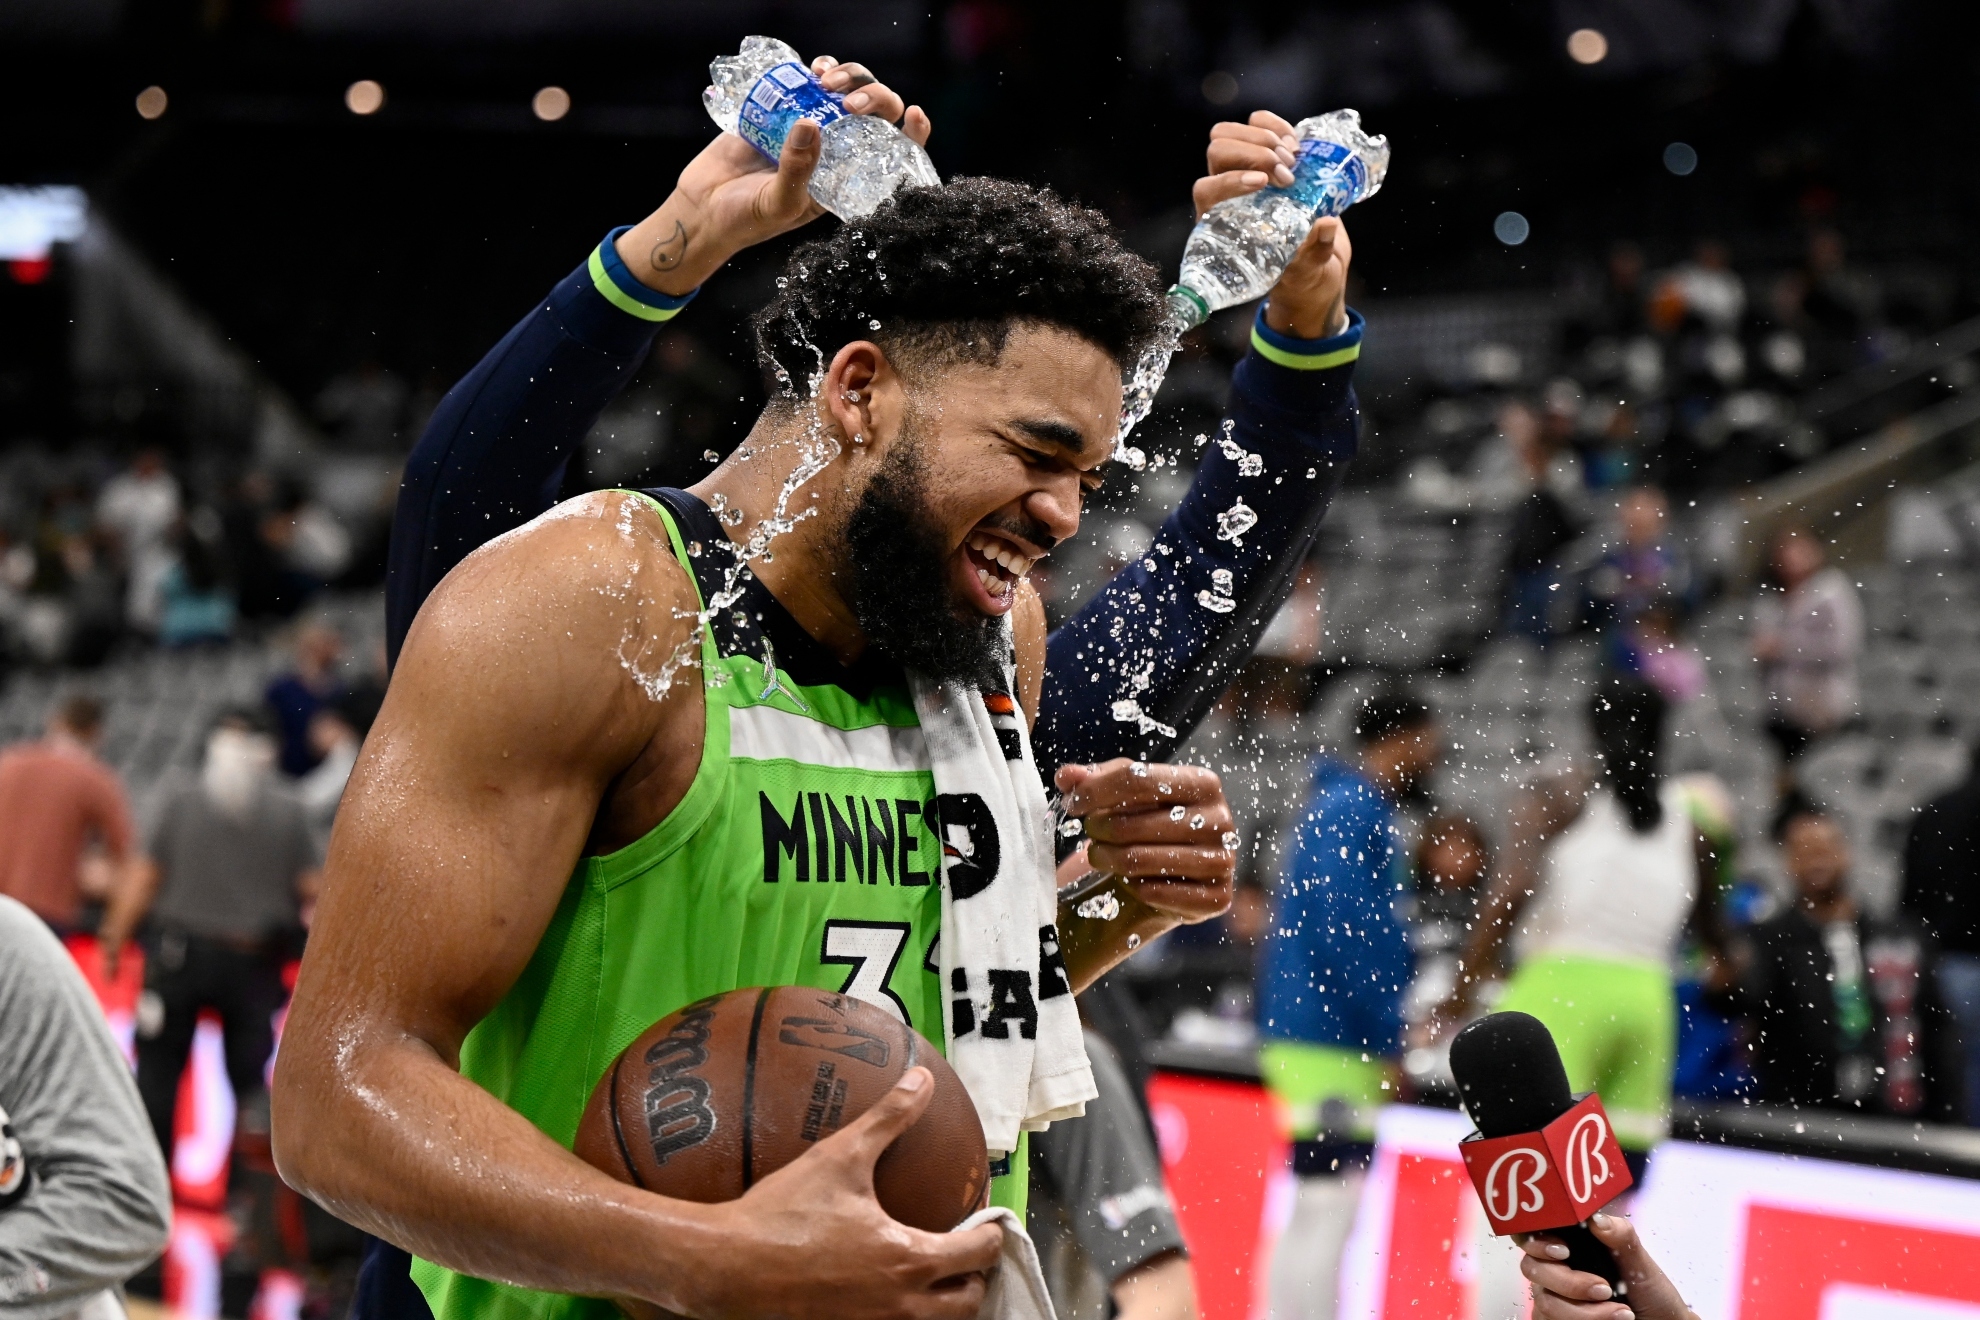 Karl-Anthony Towns to play in the World Cup with the Dominican Republic